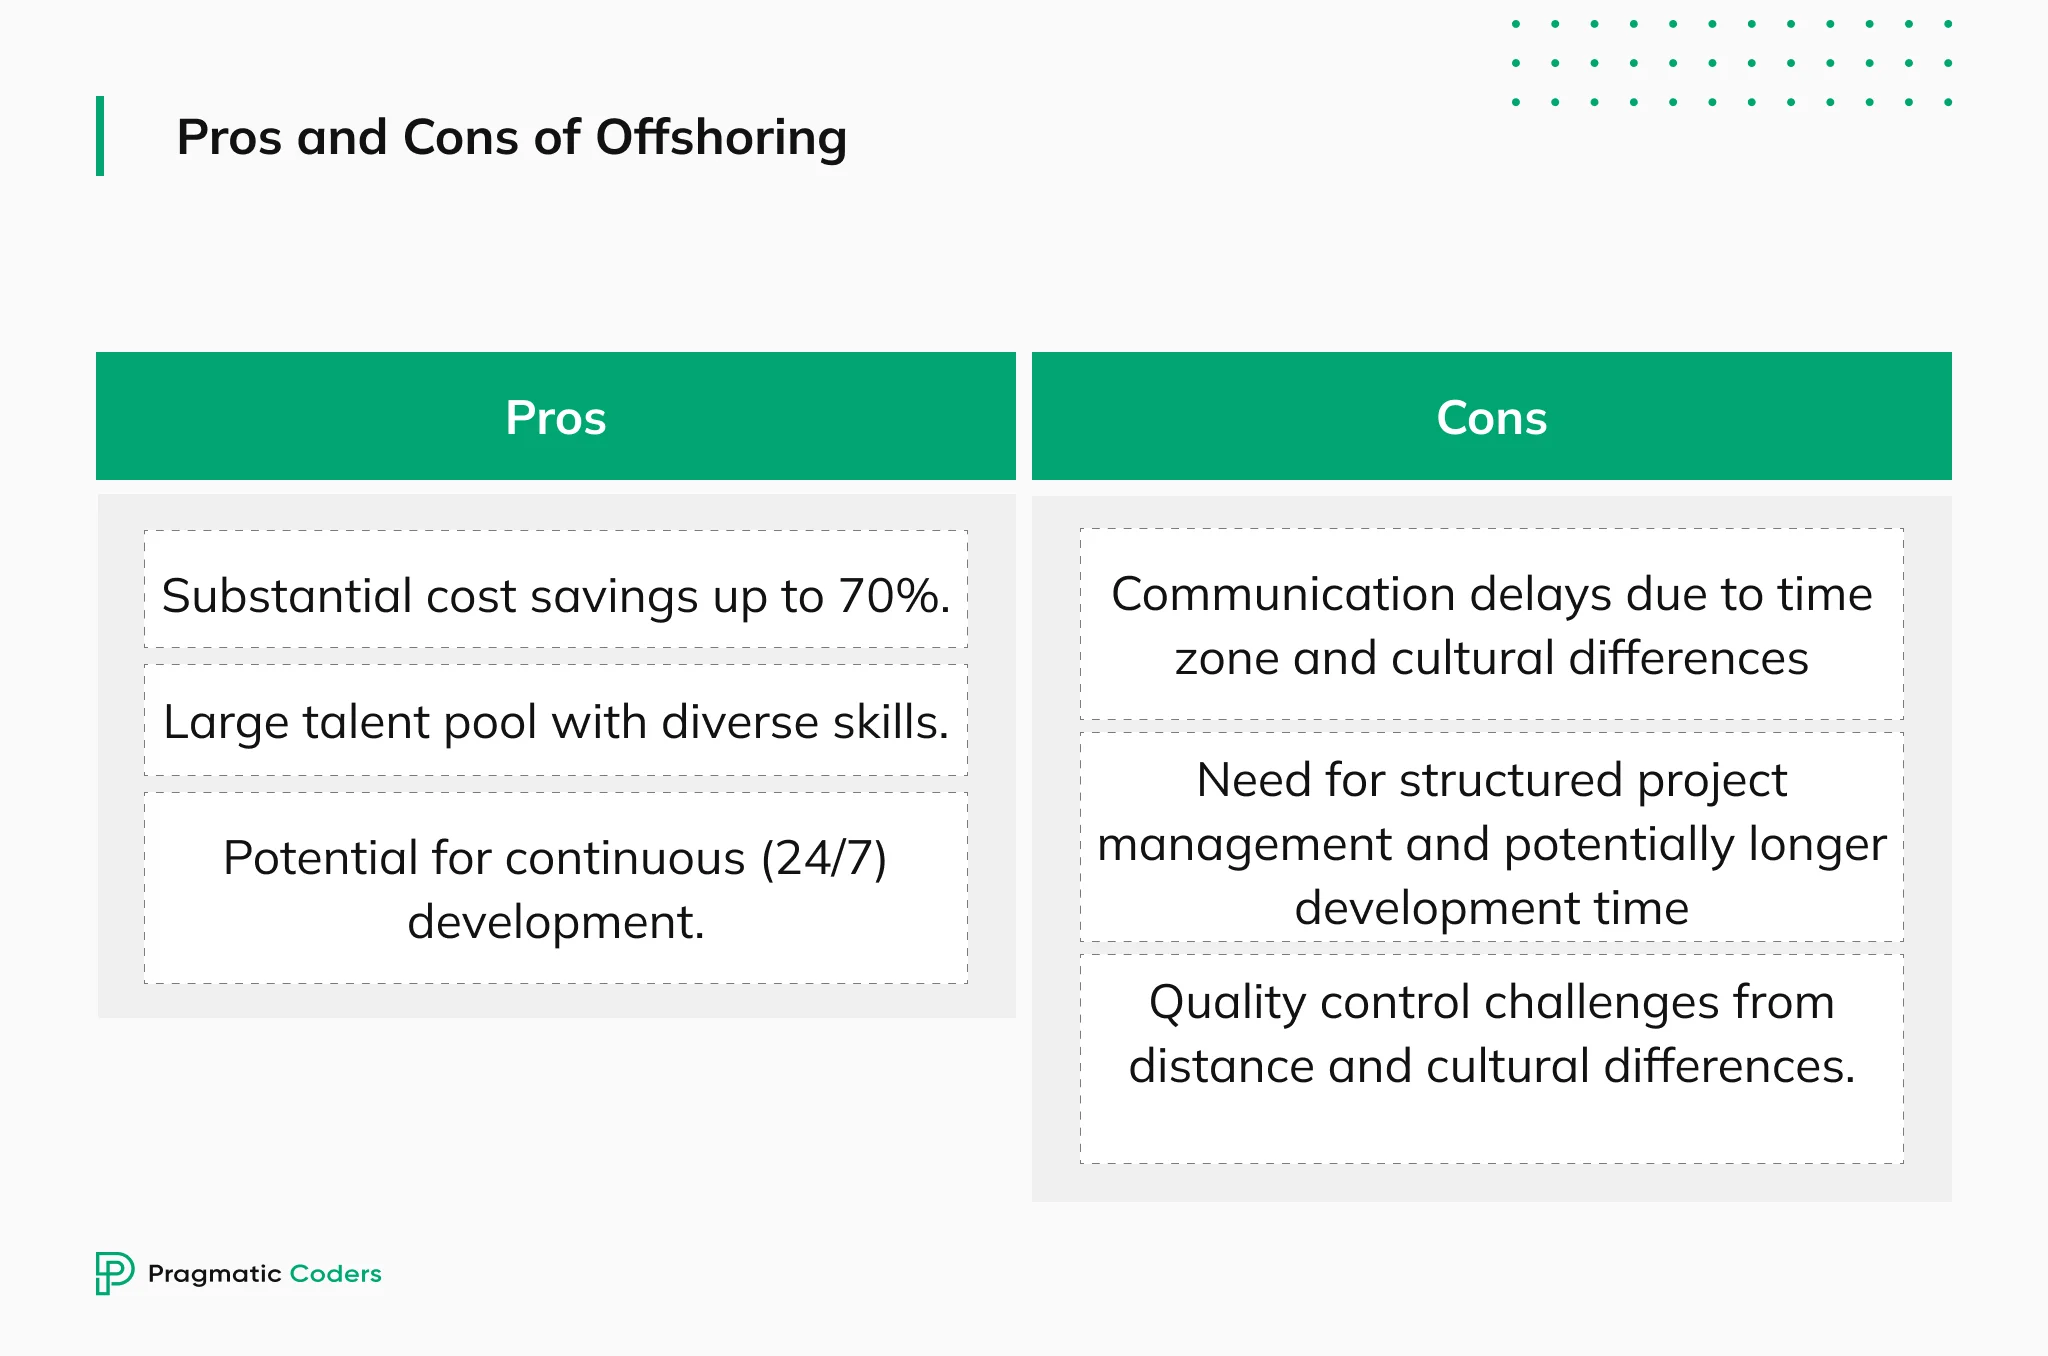 Pros and cons of offshoring